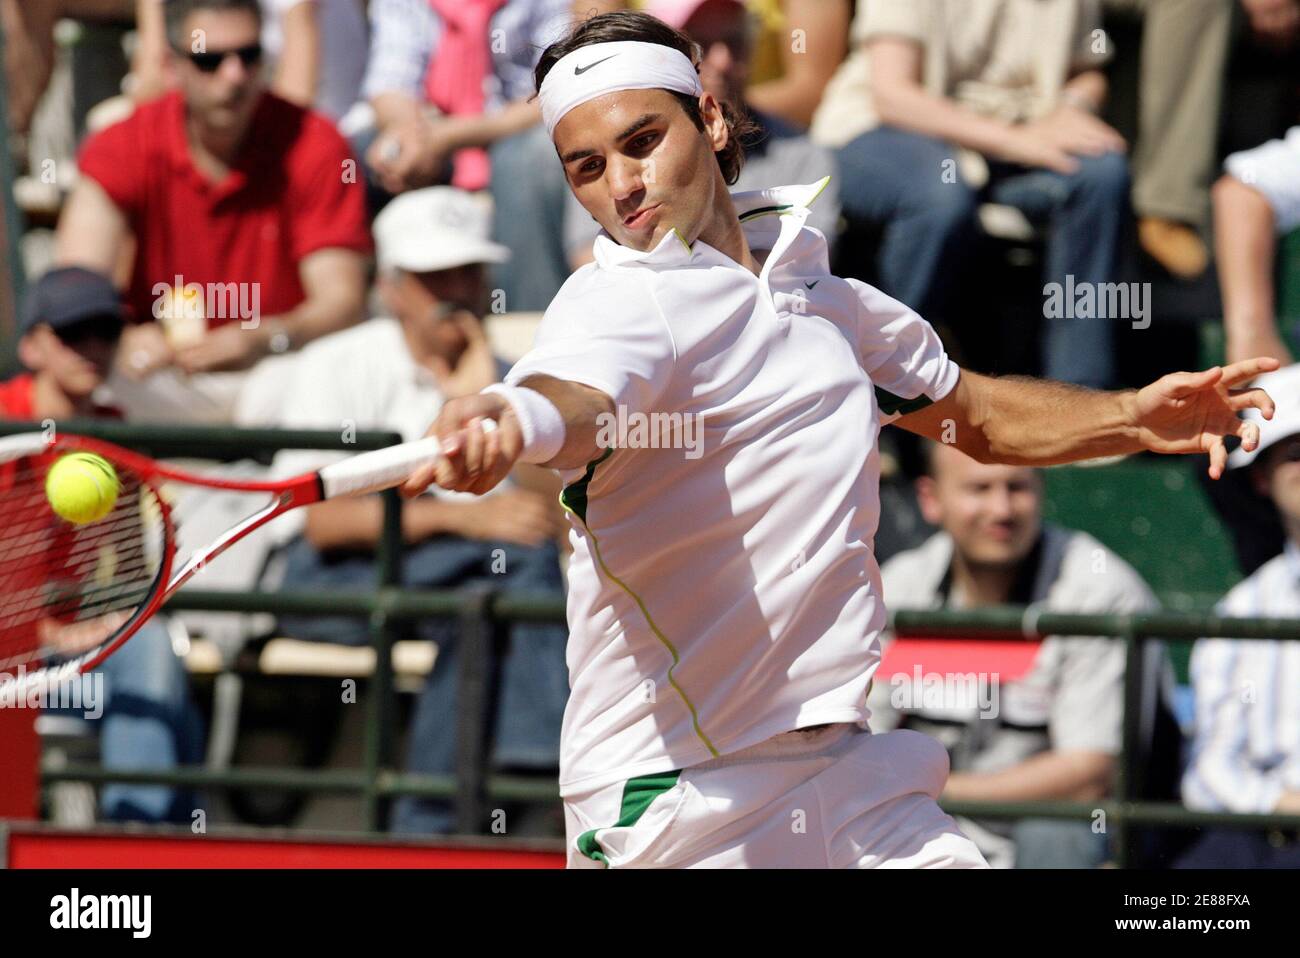 Switzerland's Roger Federer returns a volley from David Nalbandian of  Argentina during their semi-final match at the Rome Masters tennis  tournament in Rome May 13, 2006. REUTERS/Chris Helgren Stock Photo - Alamy